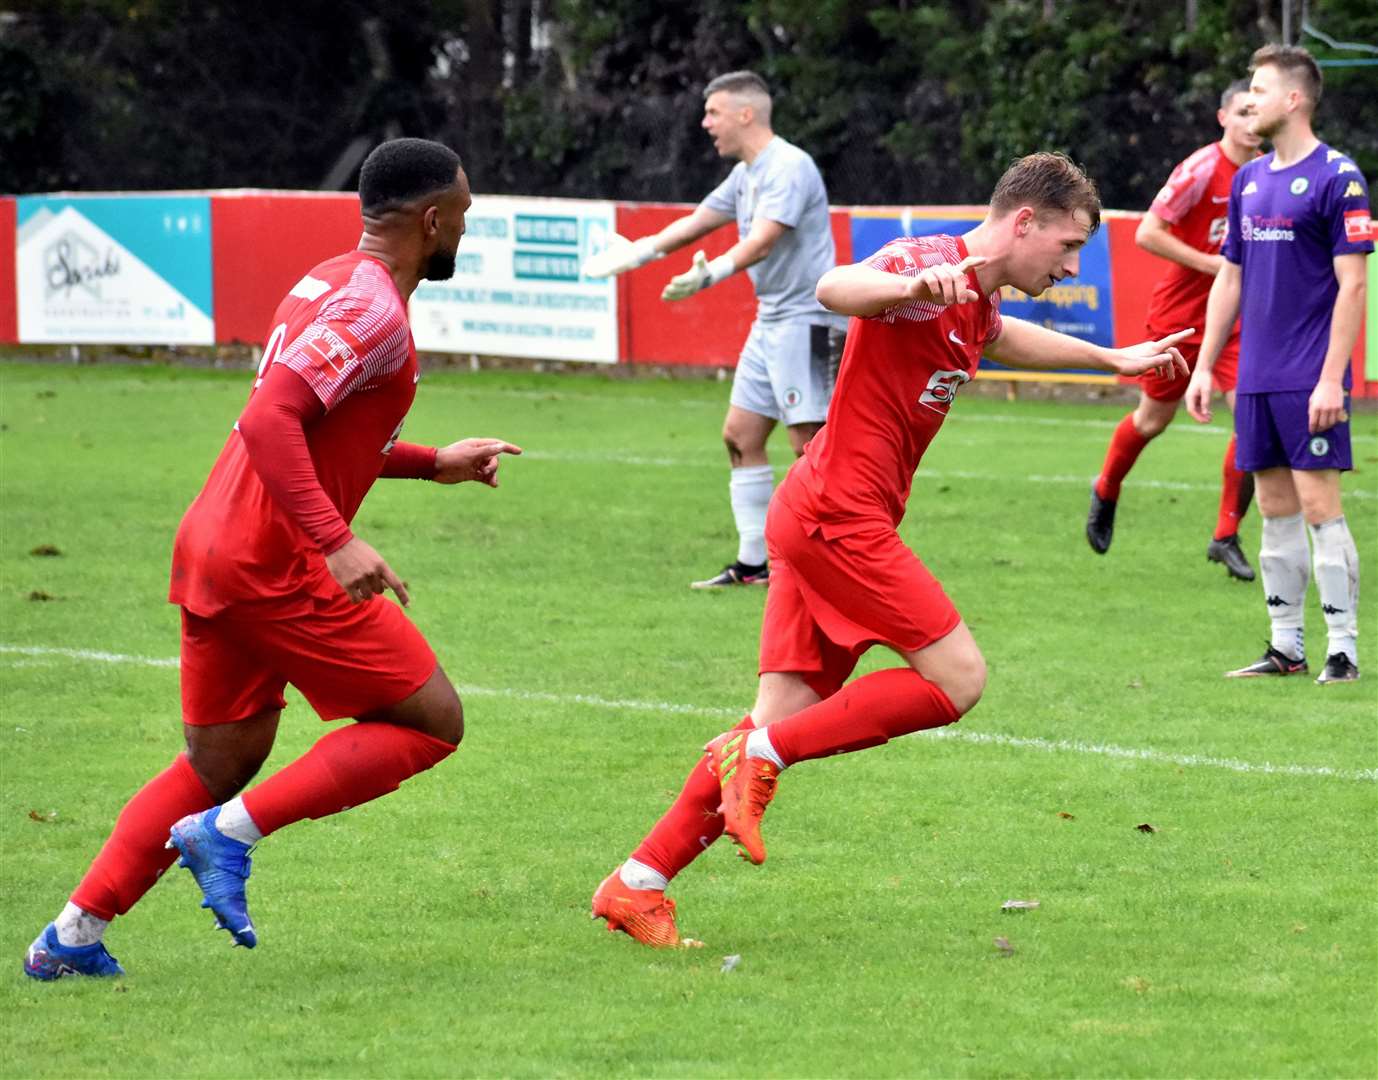 Ethan Smith celebrates his goal against Burgess Hill. Picture: Randolph File